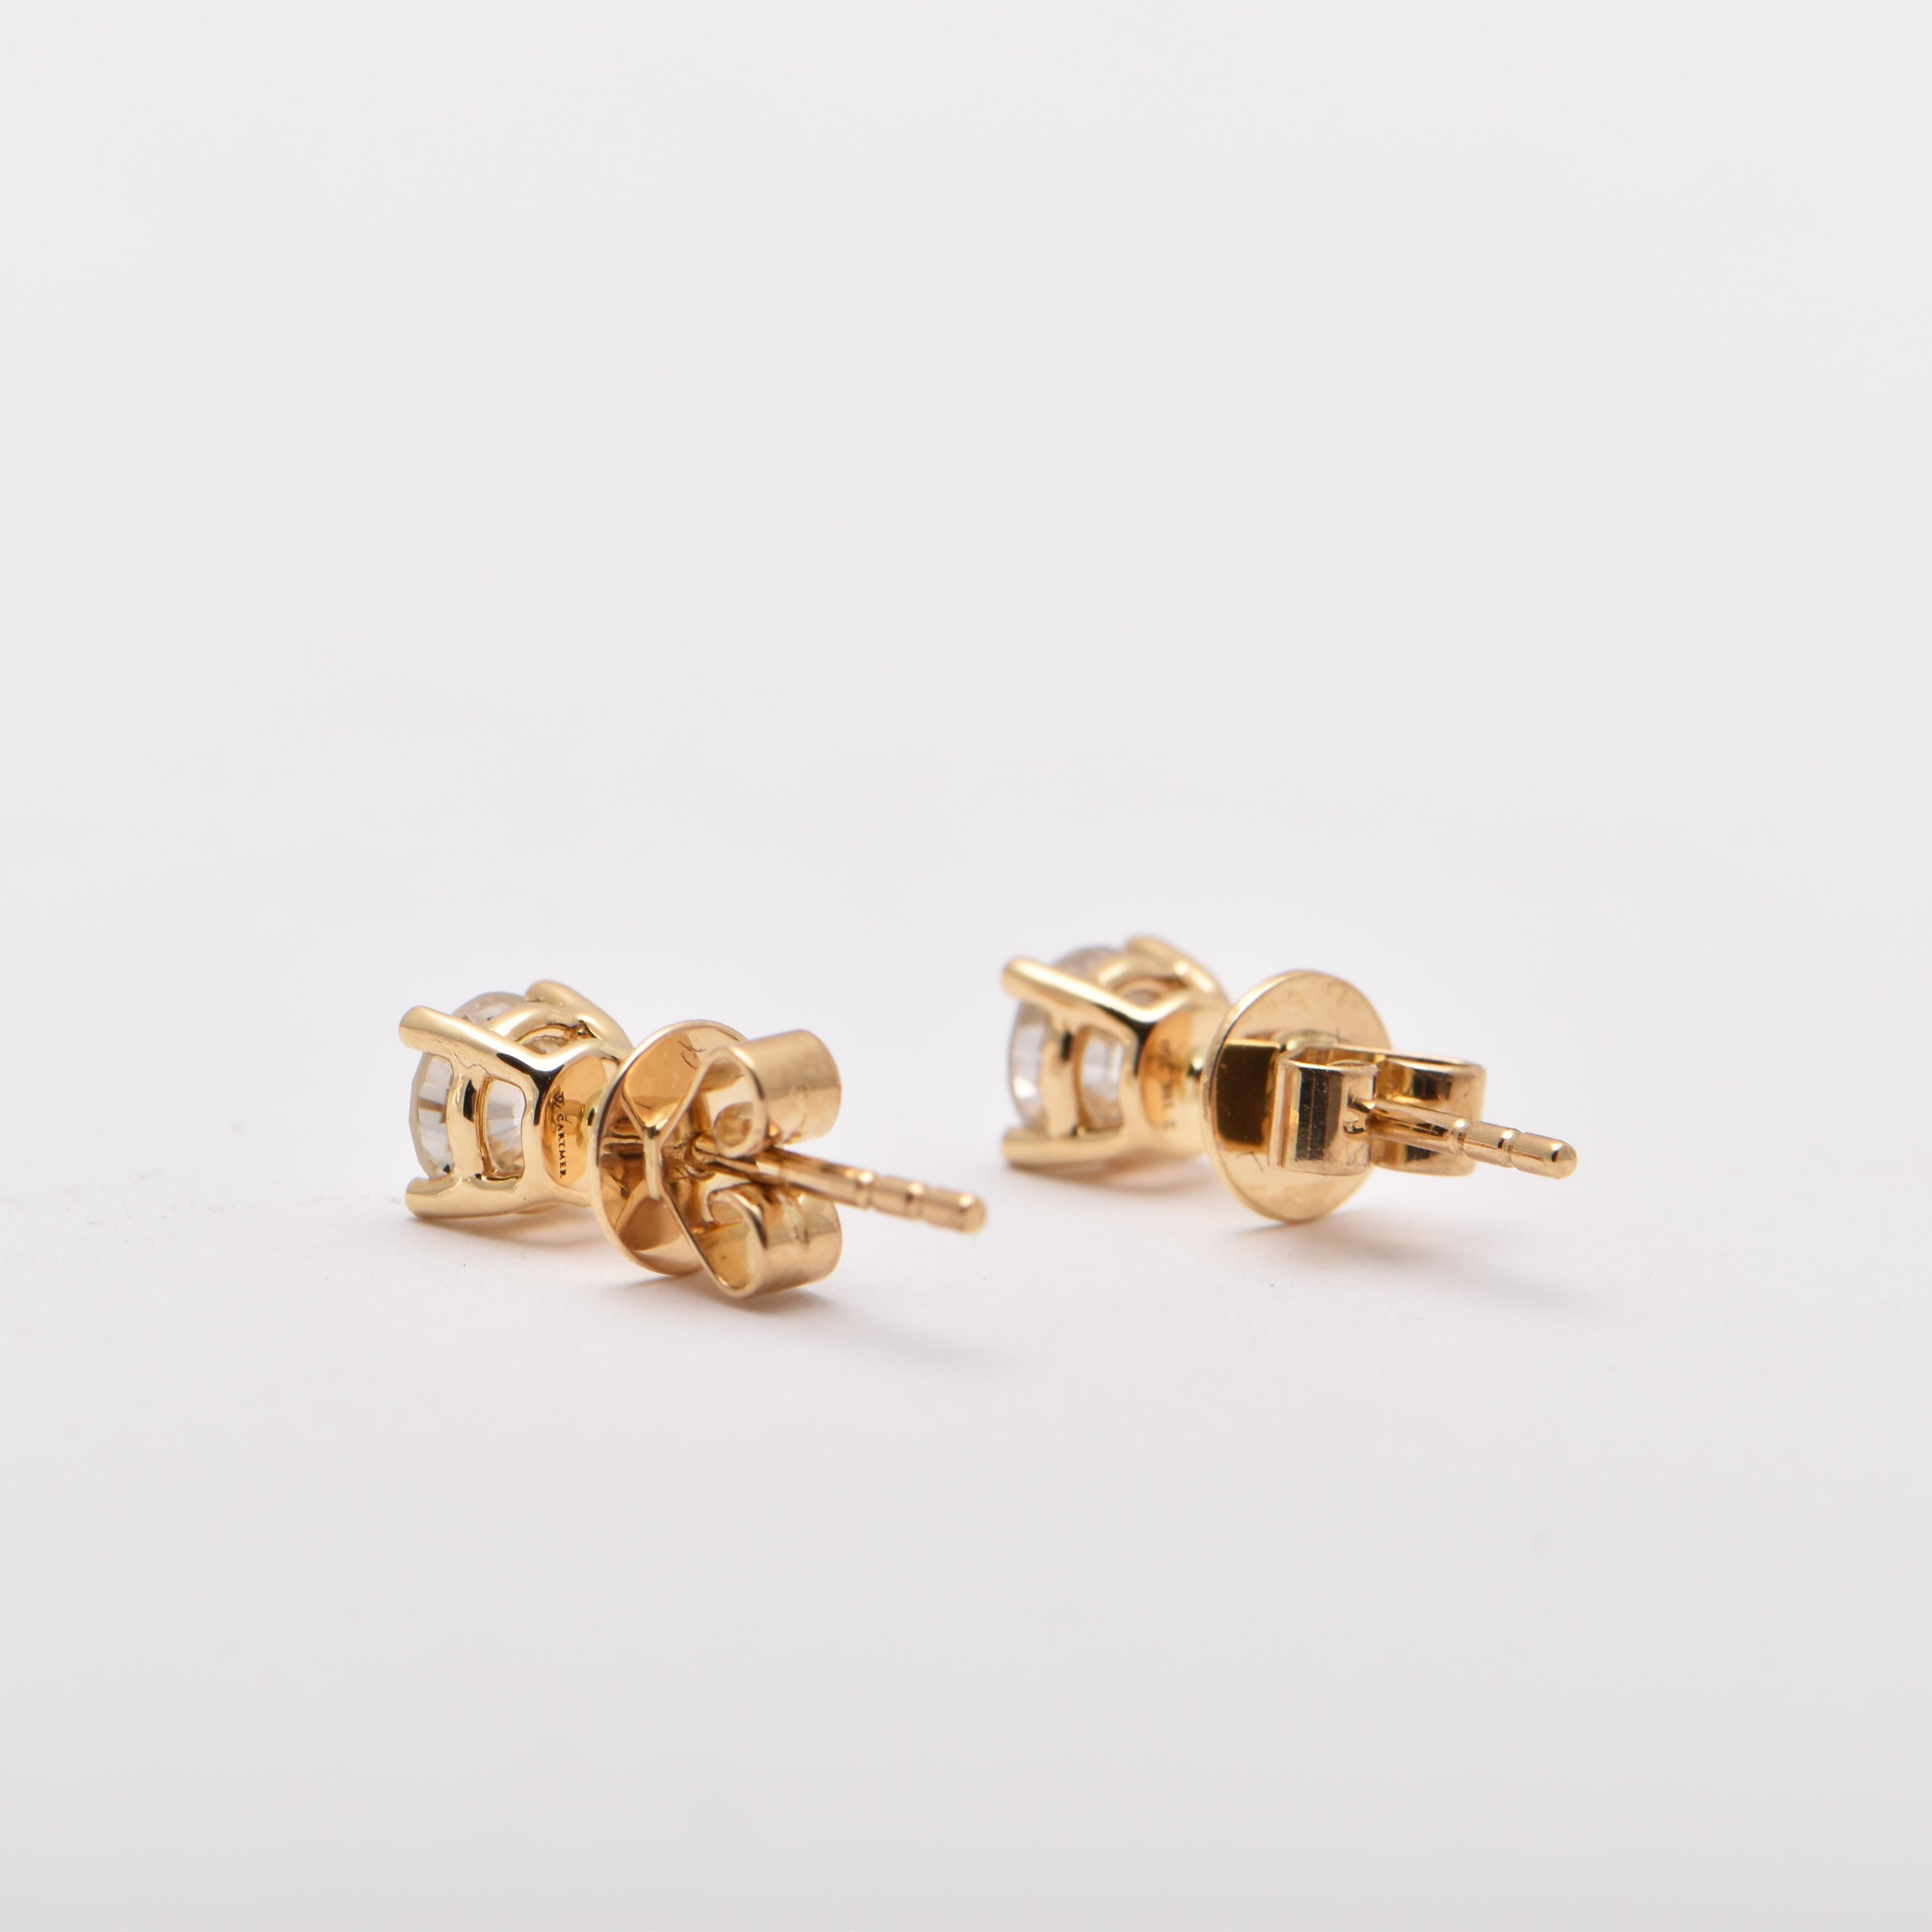 Round Cut 0.68 Carat Diamond Studs in 18 Carat Yellow Gold For Sale